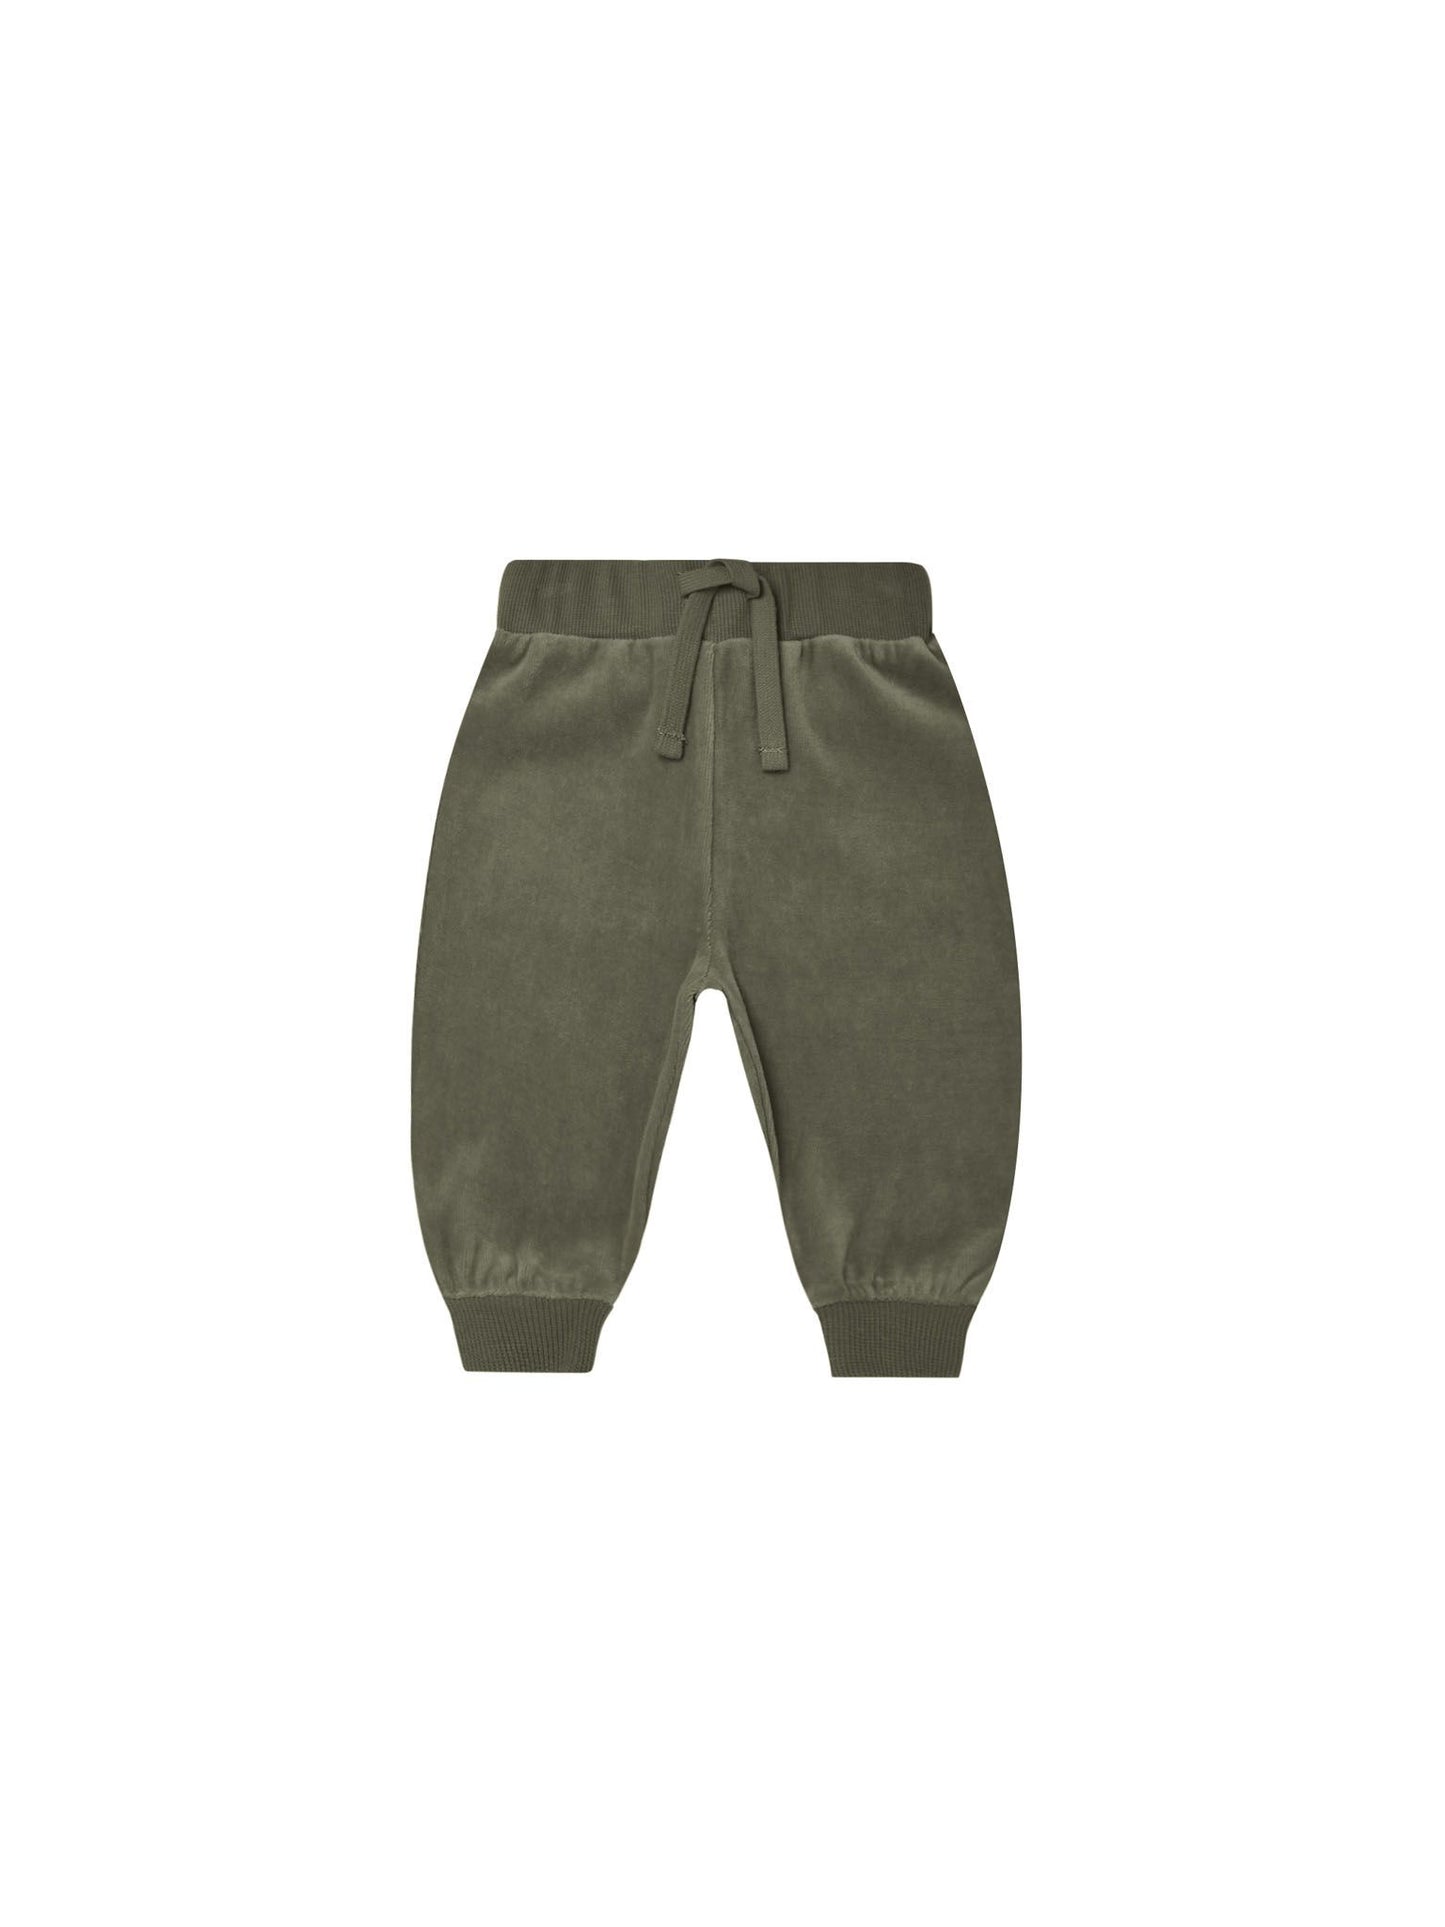 Velour Relaxed Sweatpants